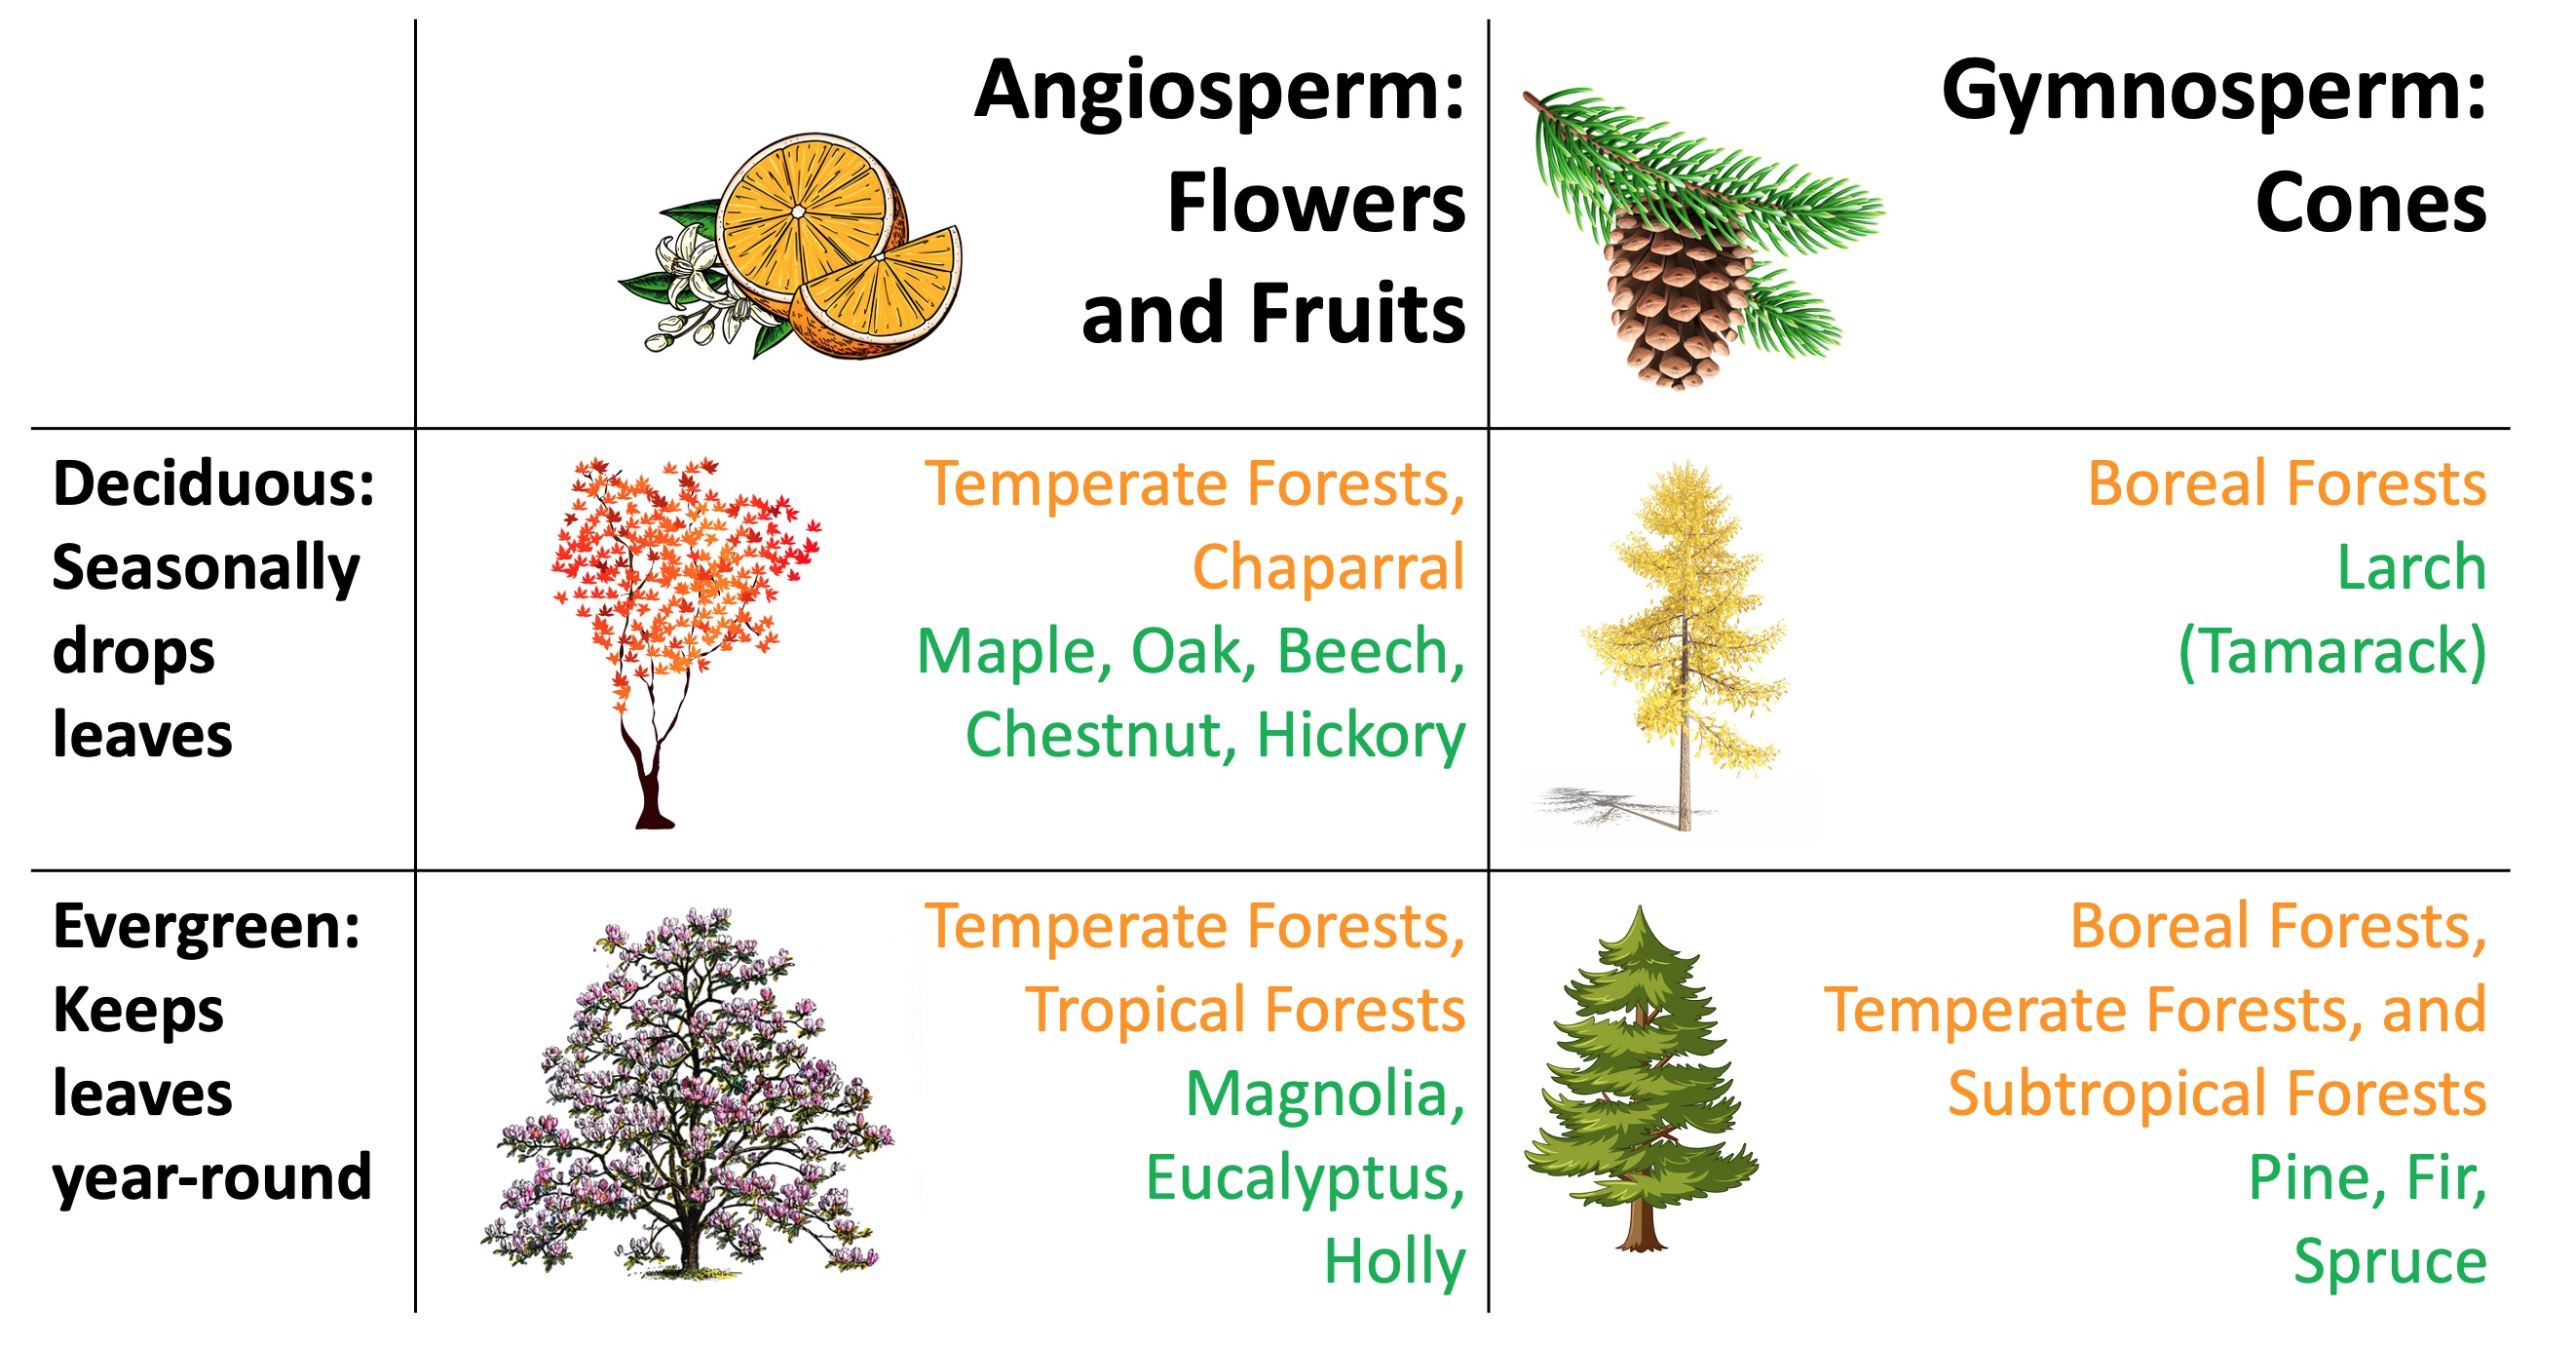 Gymnosperms and Angiosperms, Deciduous and Evergreeen